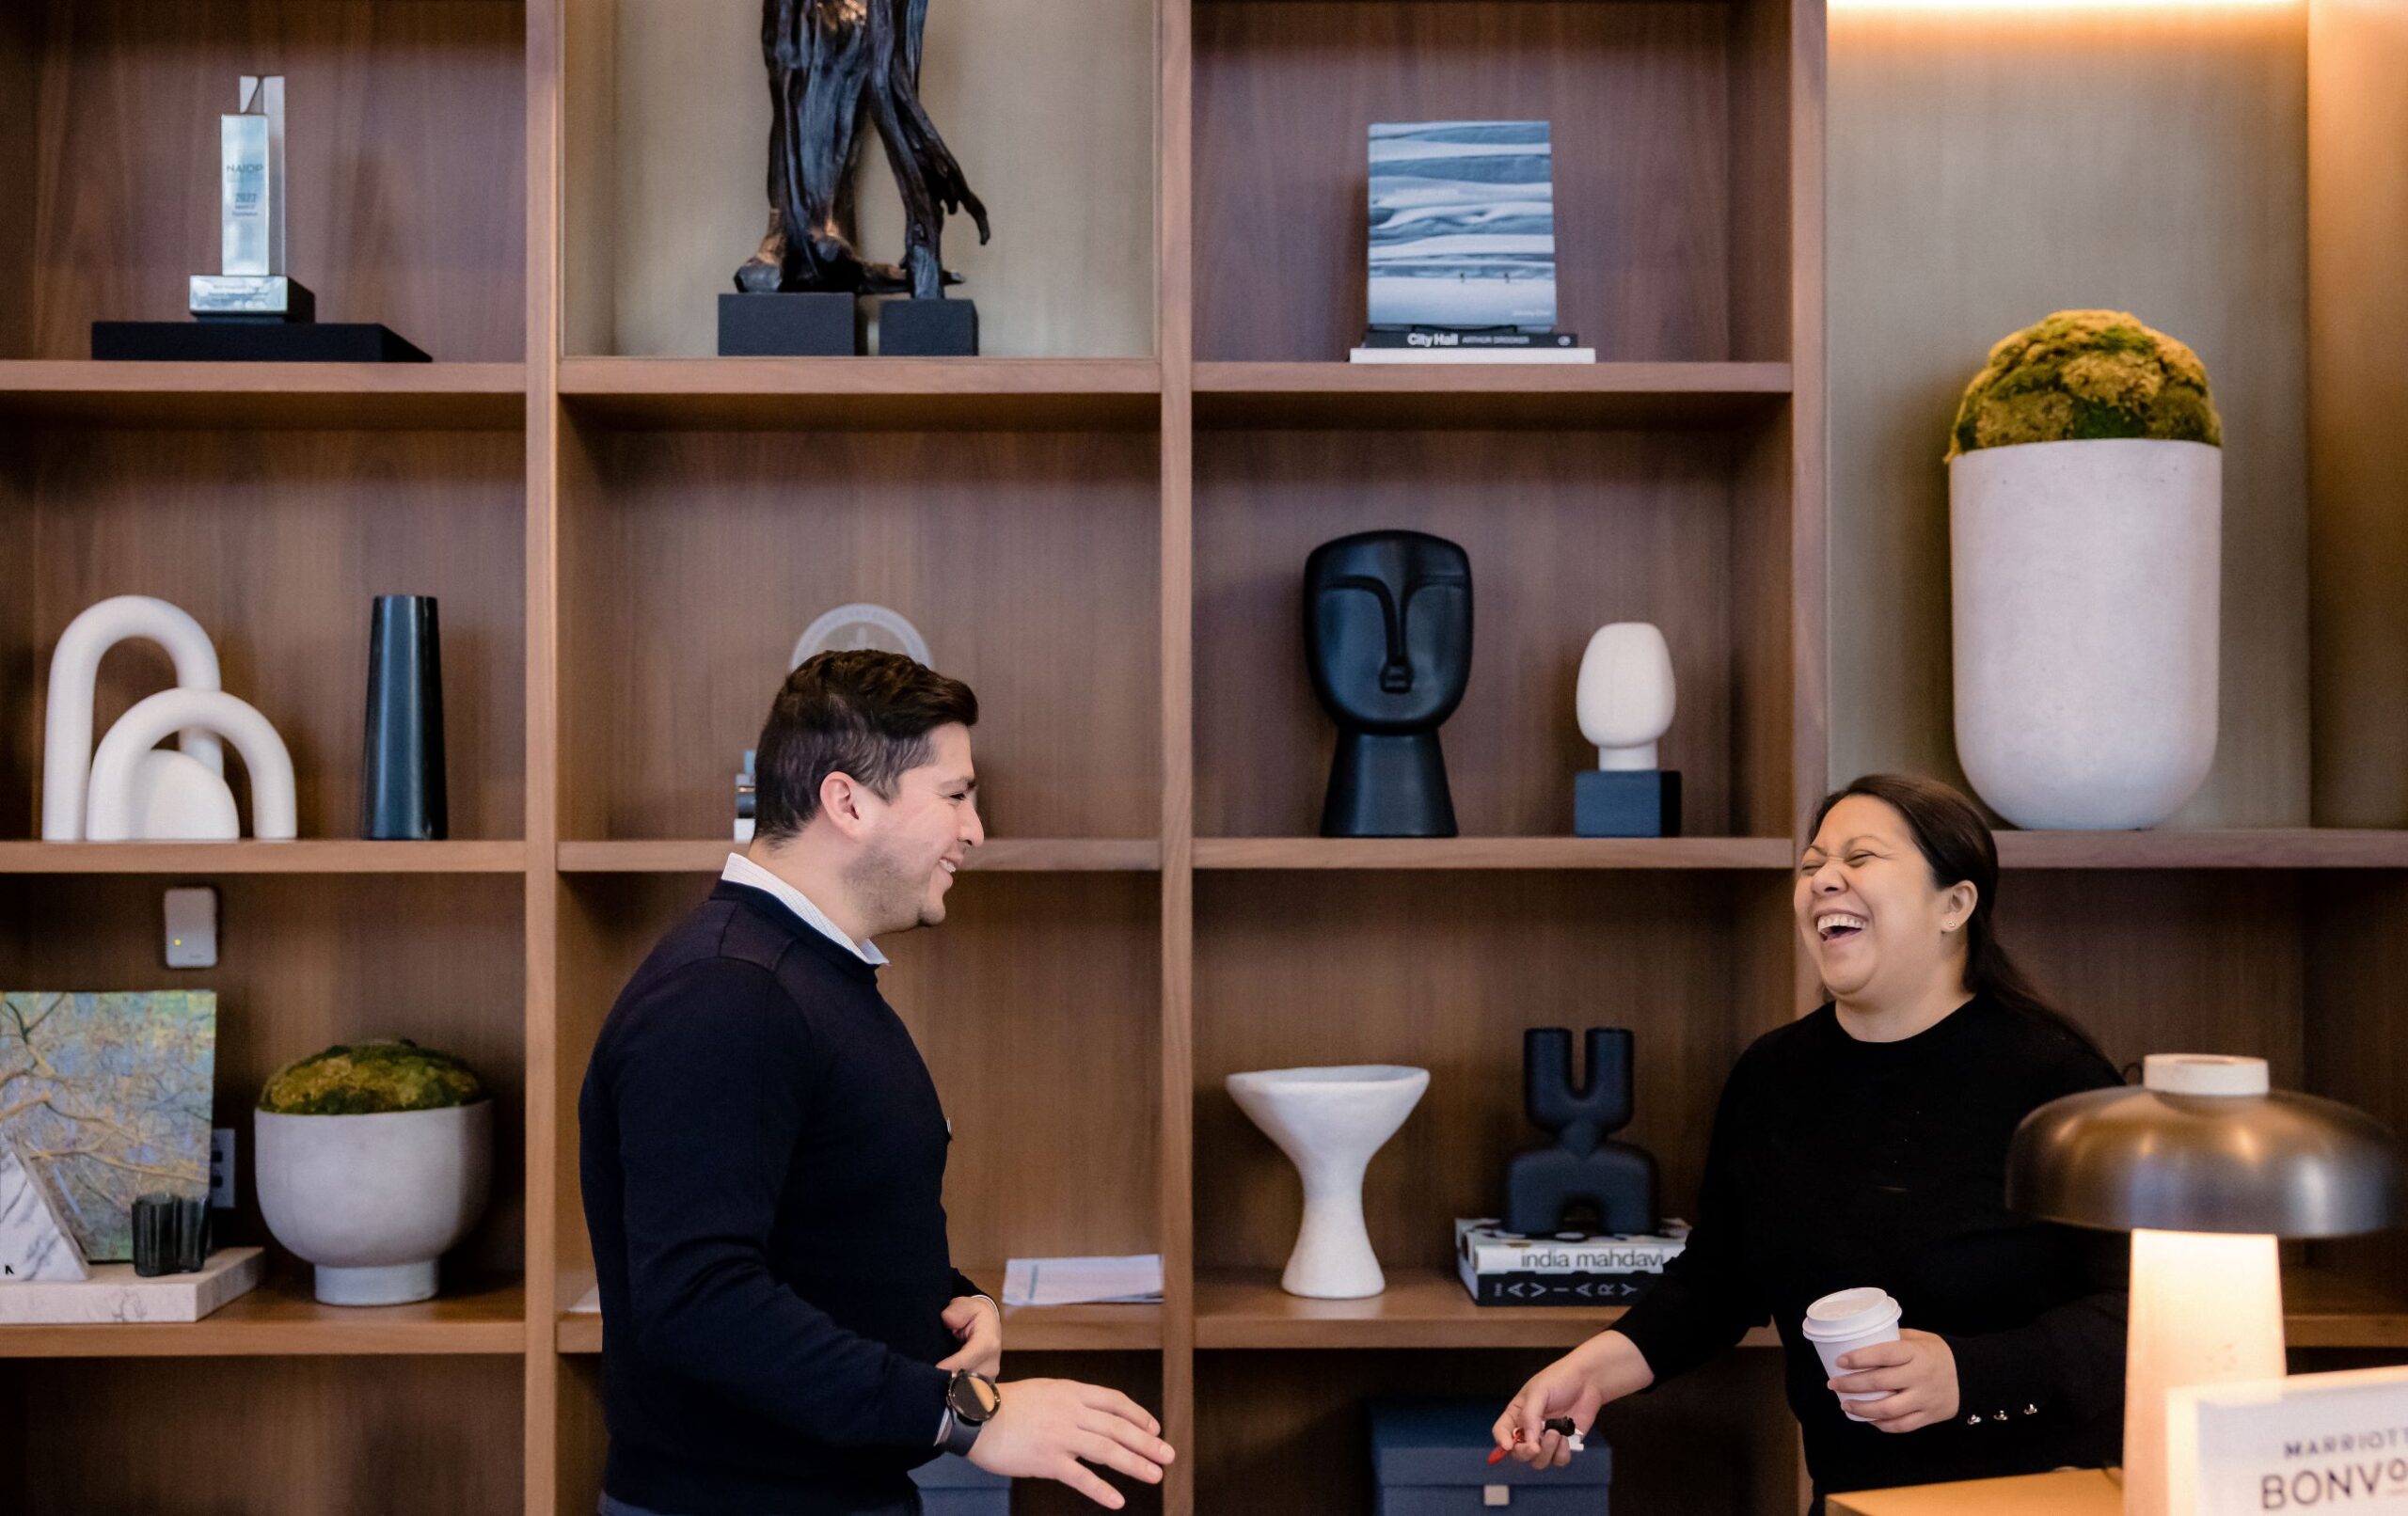 Two associates laughing together behind the front desk